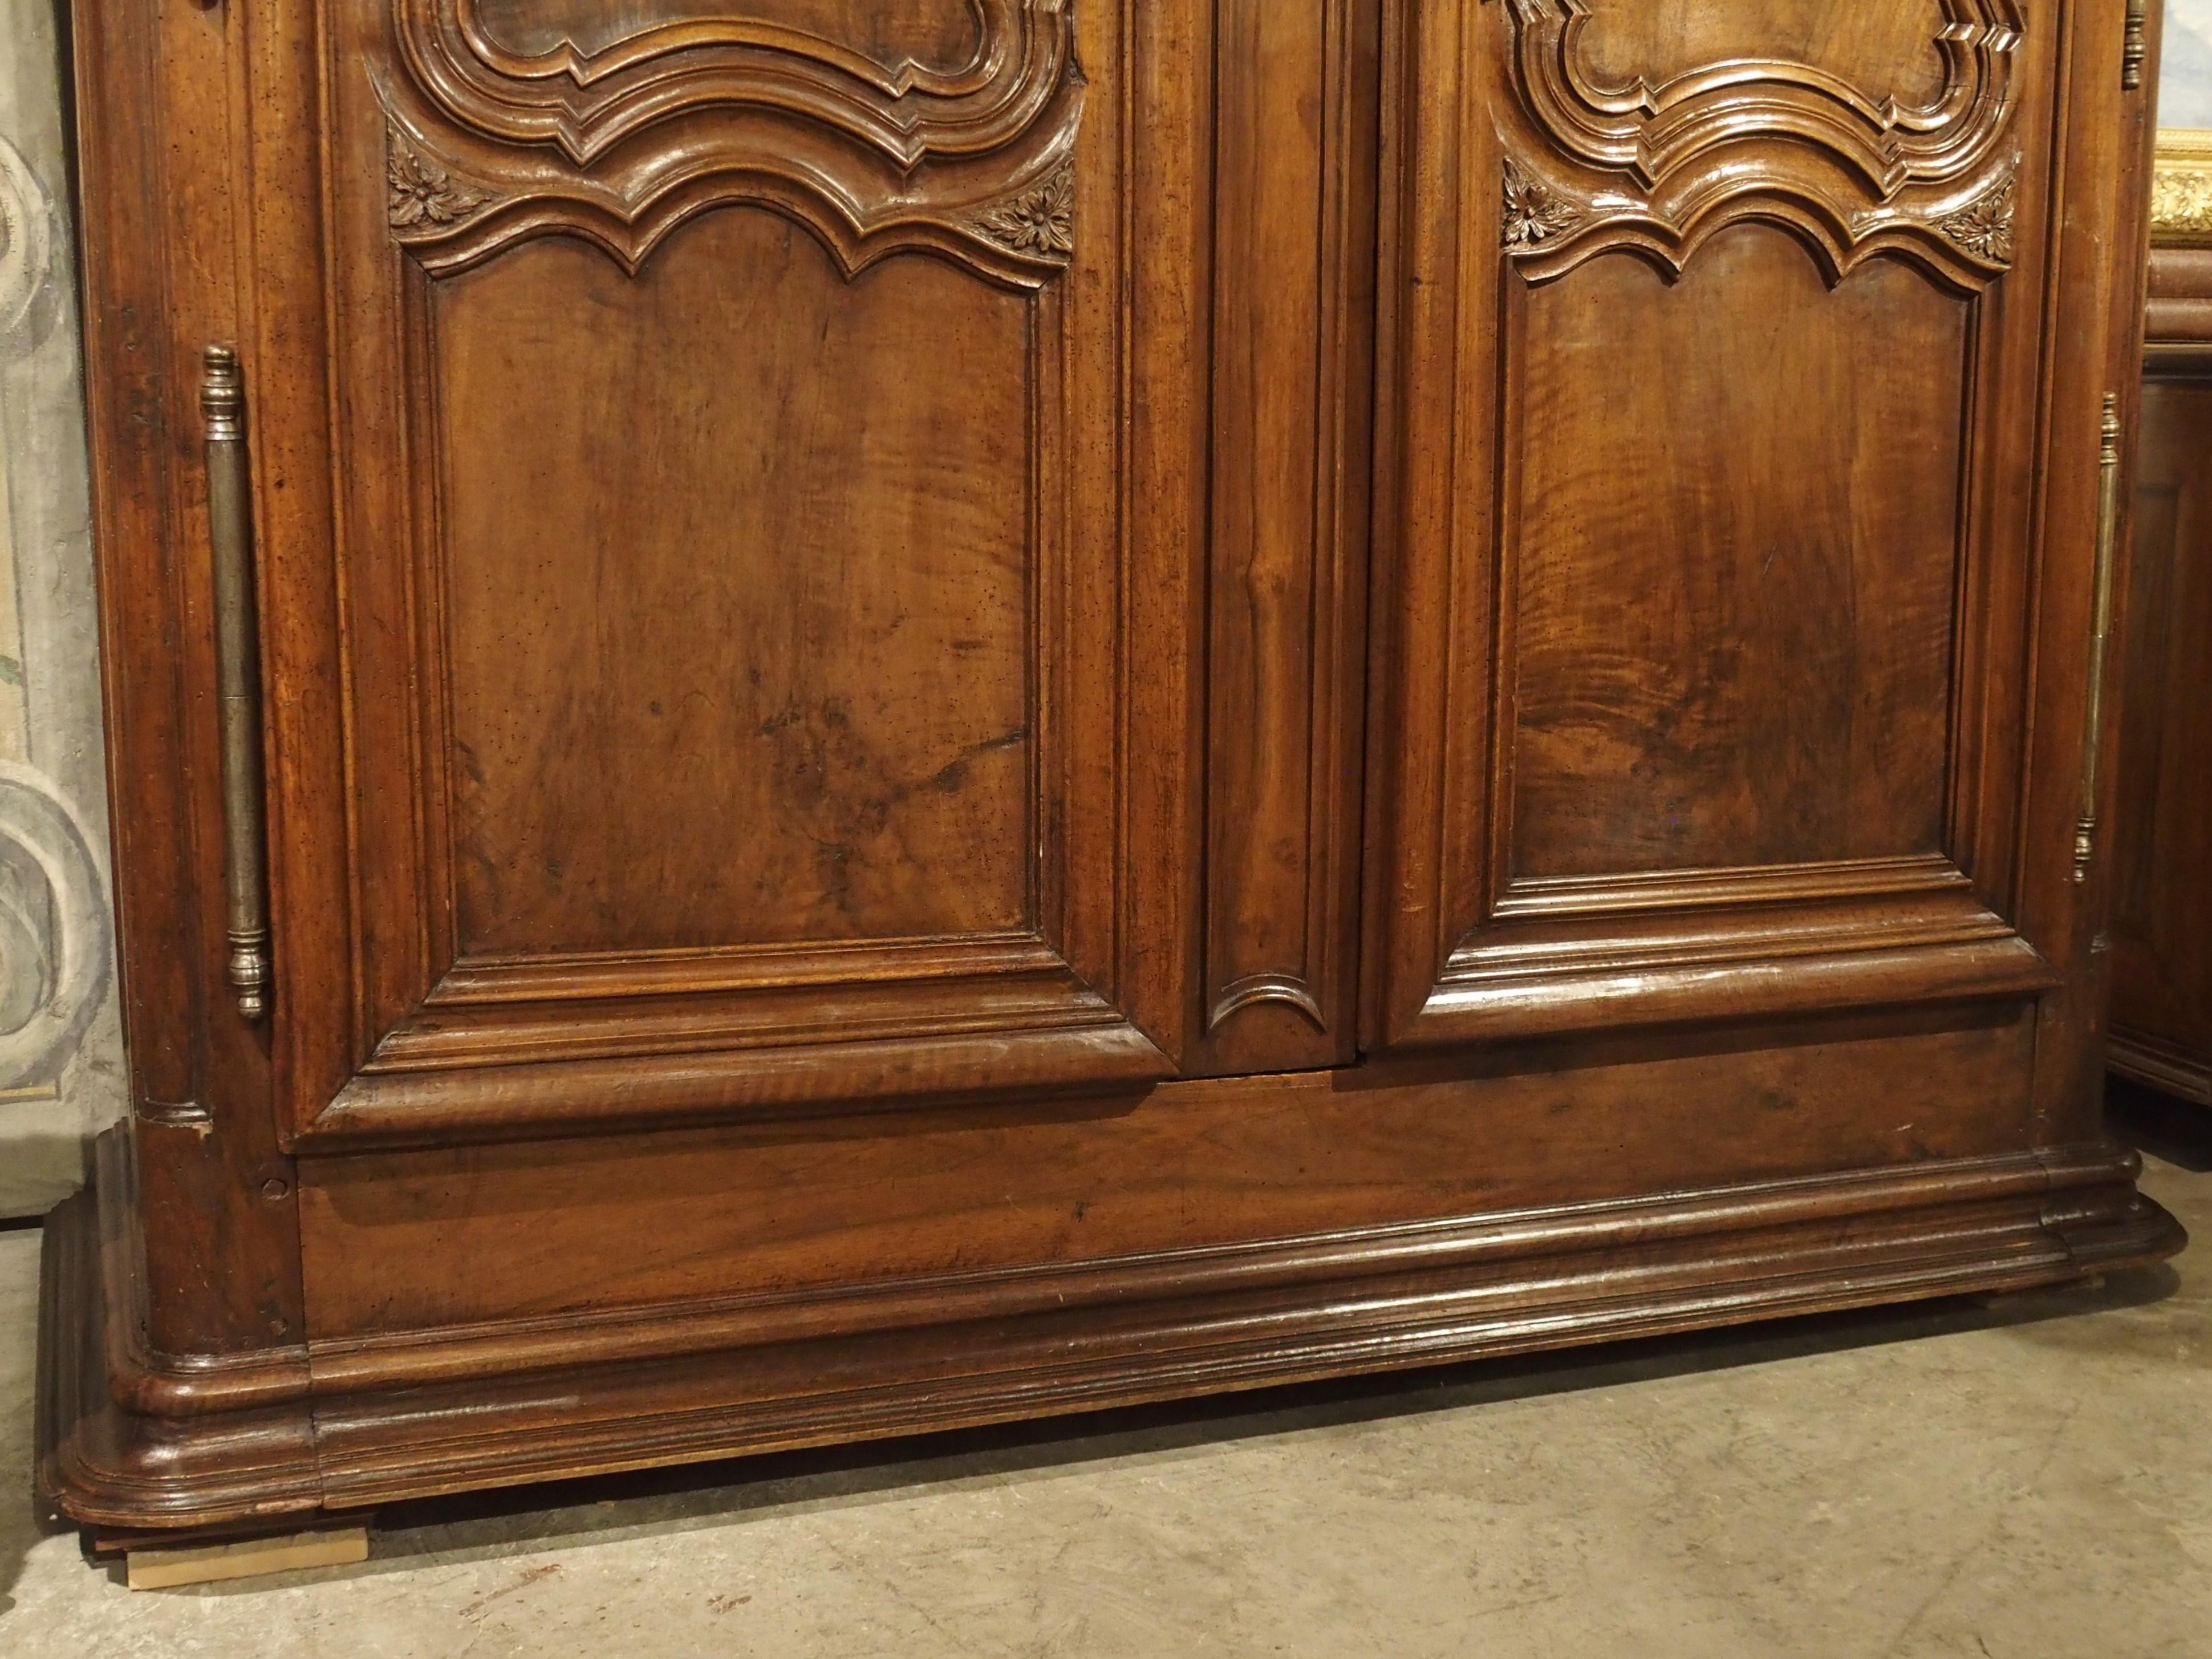 Hand-Carved 18th Century Lyonnaise Armoire in Carved Walnut Wood